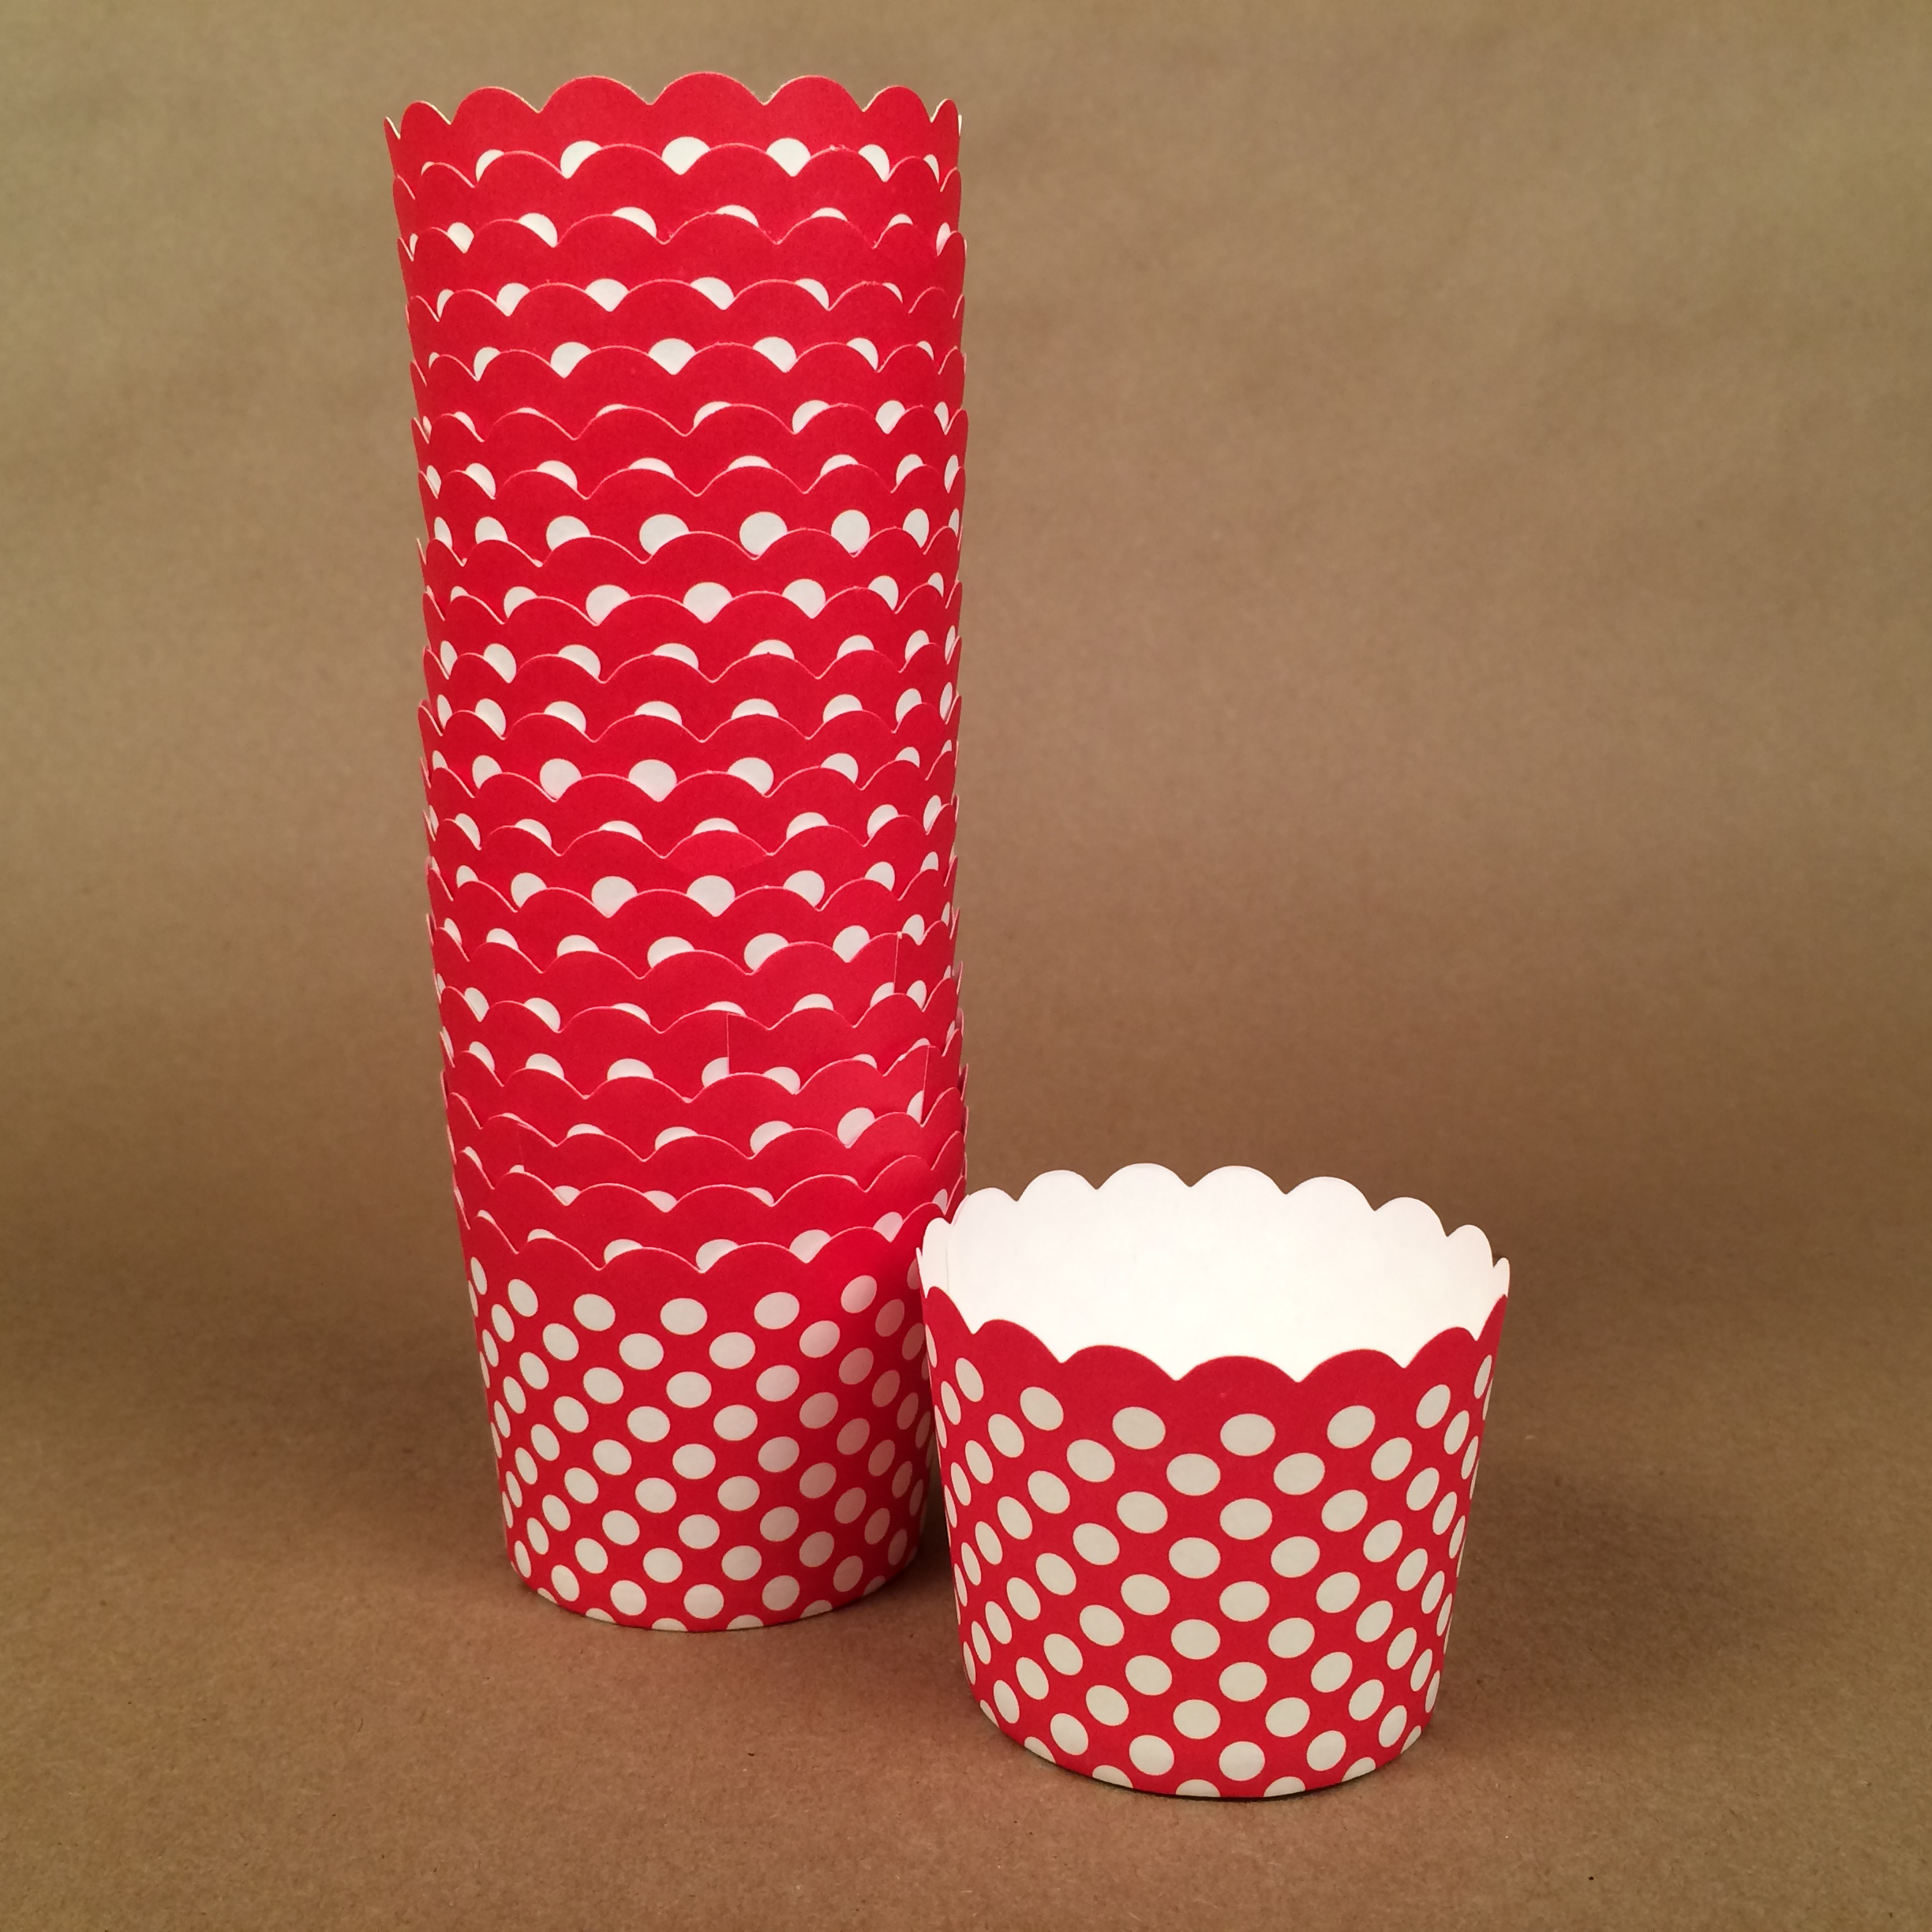 Red Dot Paper Baking Cup â€“ Kingsley Event Supply